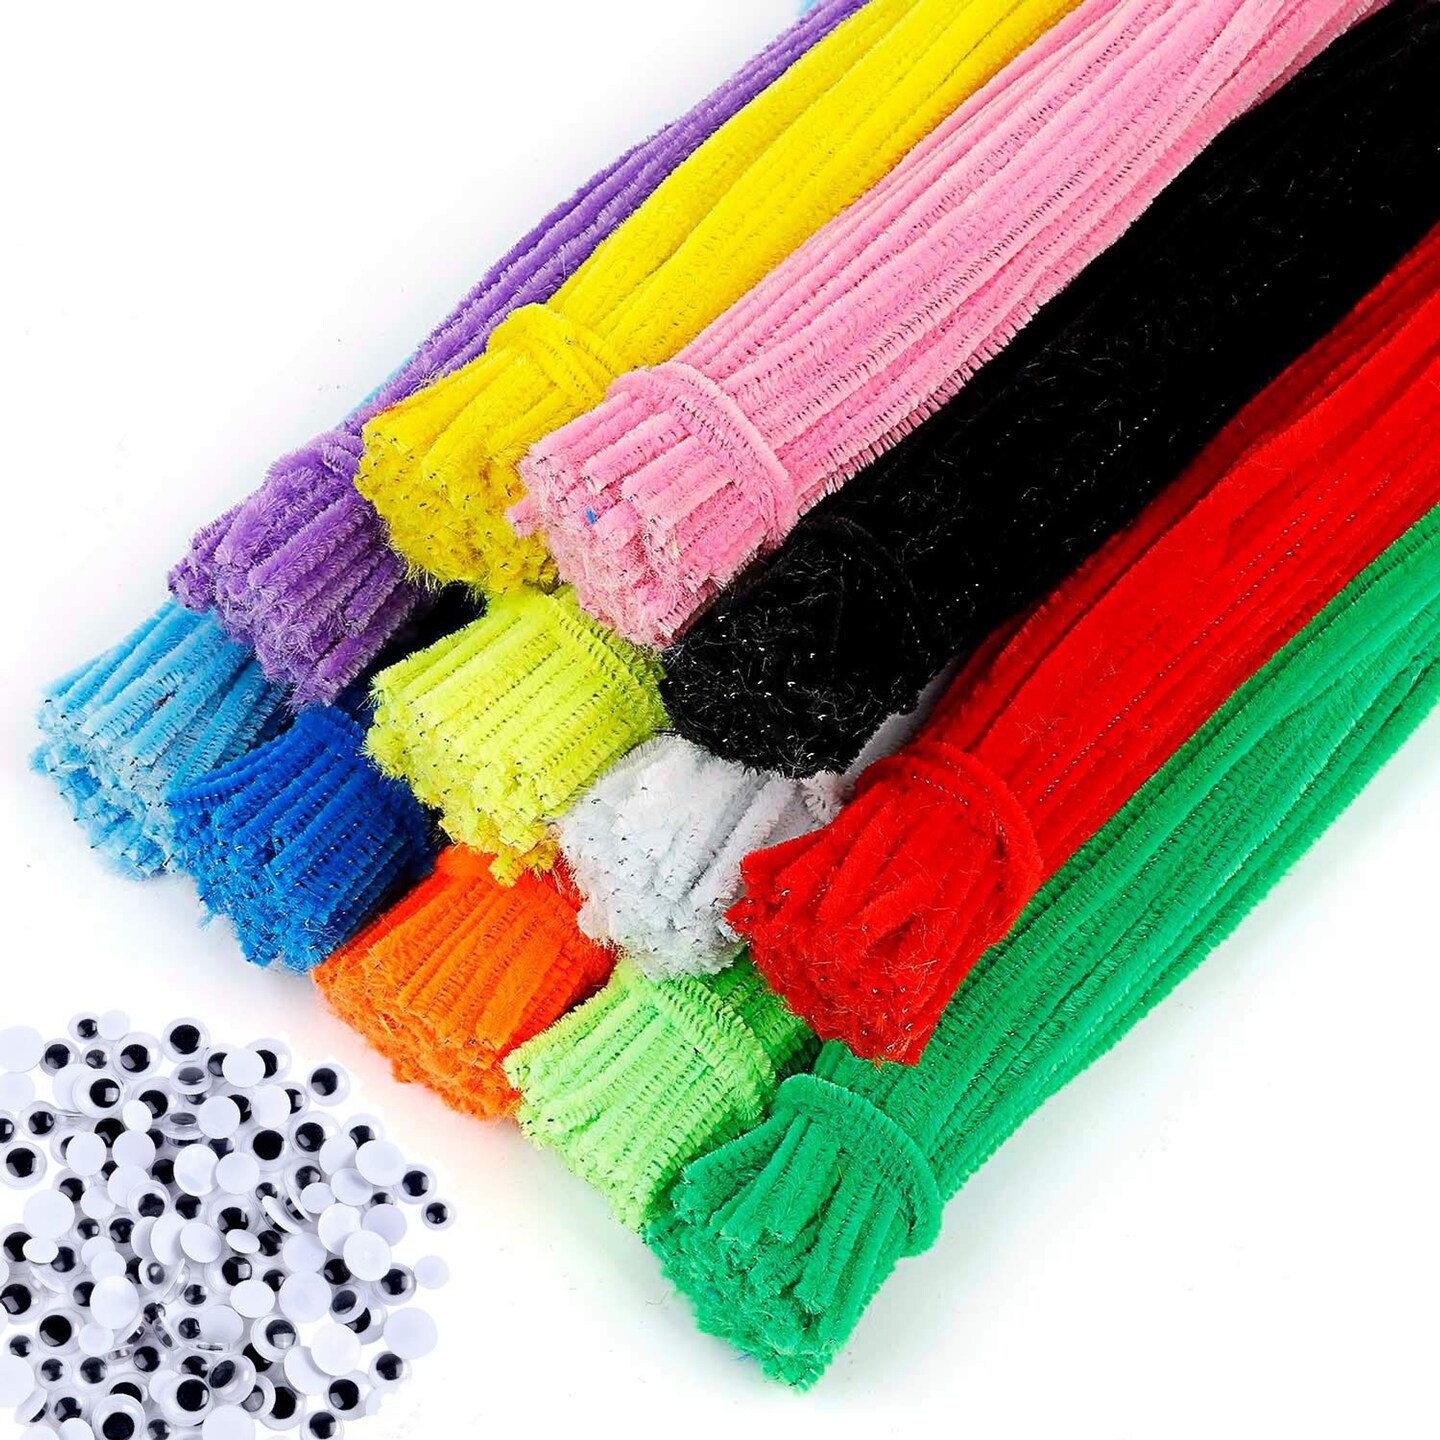 EpiqueOne 1200 Pipe Cleaners in 12 Assorted Colors plus 100 Googly Eyes1000 plus 200 Fluorescent Chenille Stem for Decorations DIY Arts and Crafts Projects Art Supplies for Adults and Kids